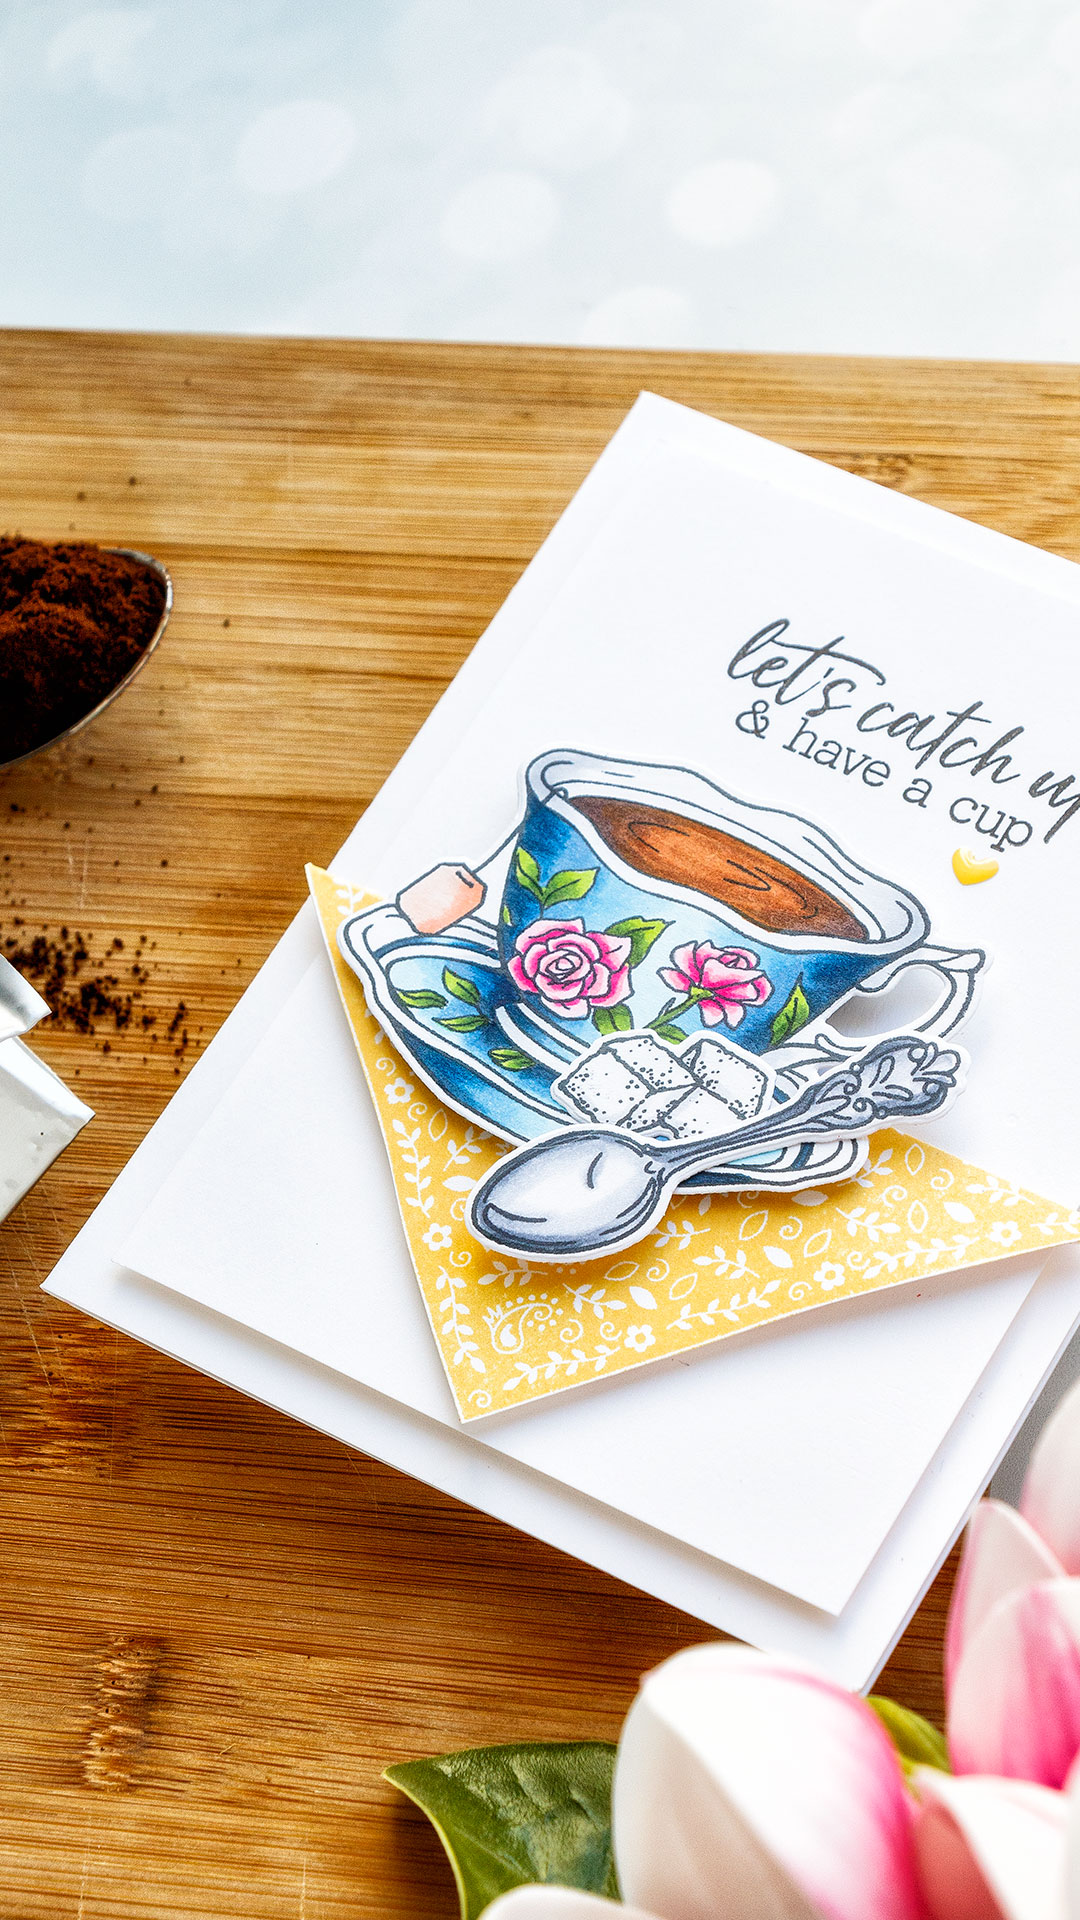 Hero Arts | Coffee or Tea? August 2018 My Monthly Hero Kit. Let's Catch Up & Have A Cup card by Yana Smakula #stamping #mymontlyhero #mmh #heroarts #cardmaking #handmadecard